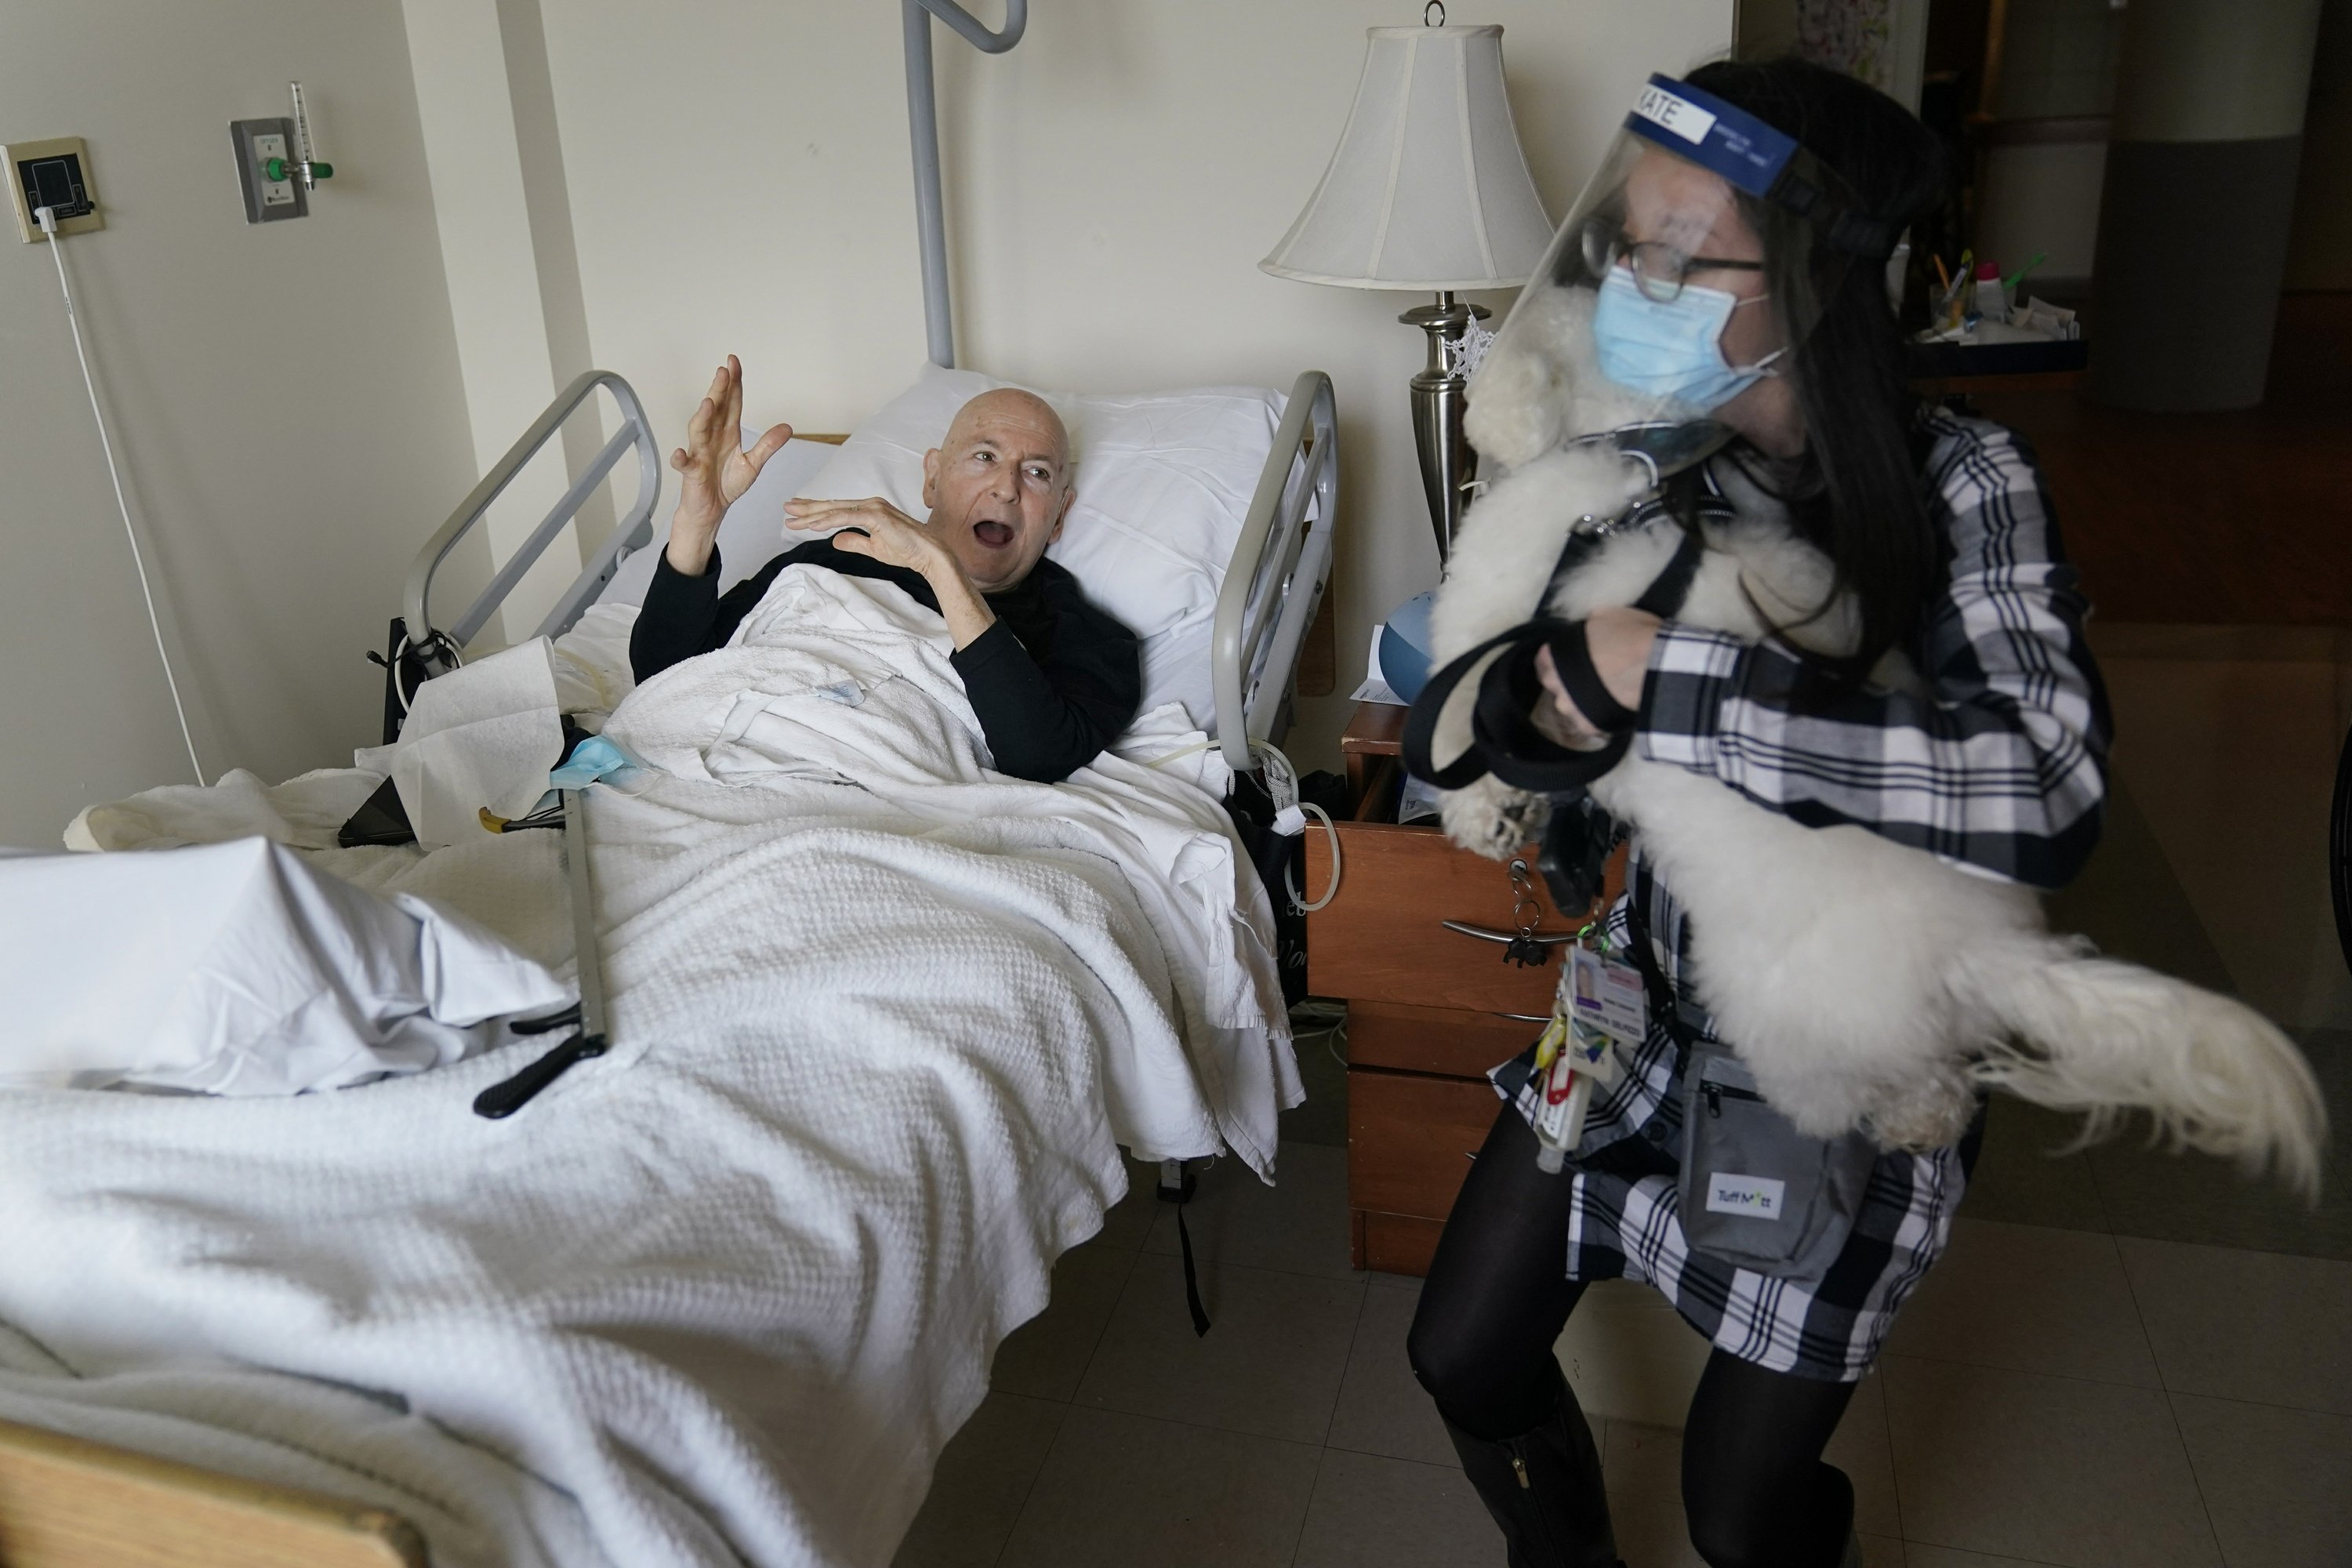 Dogs make it easier to isolate the pandemic for nursing home residents